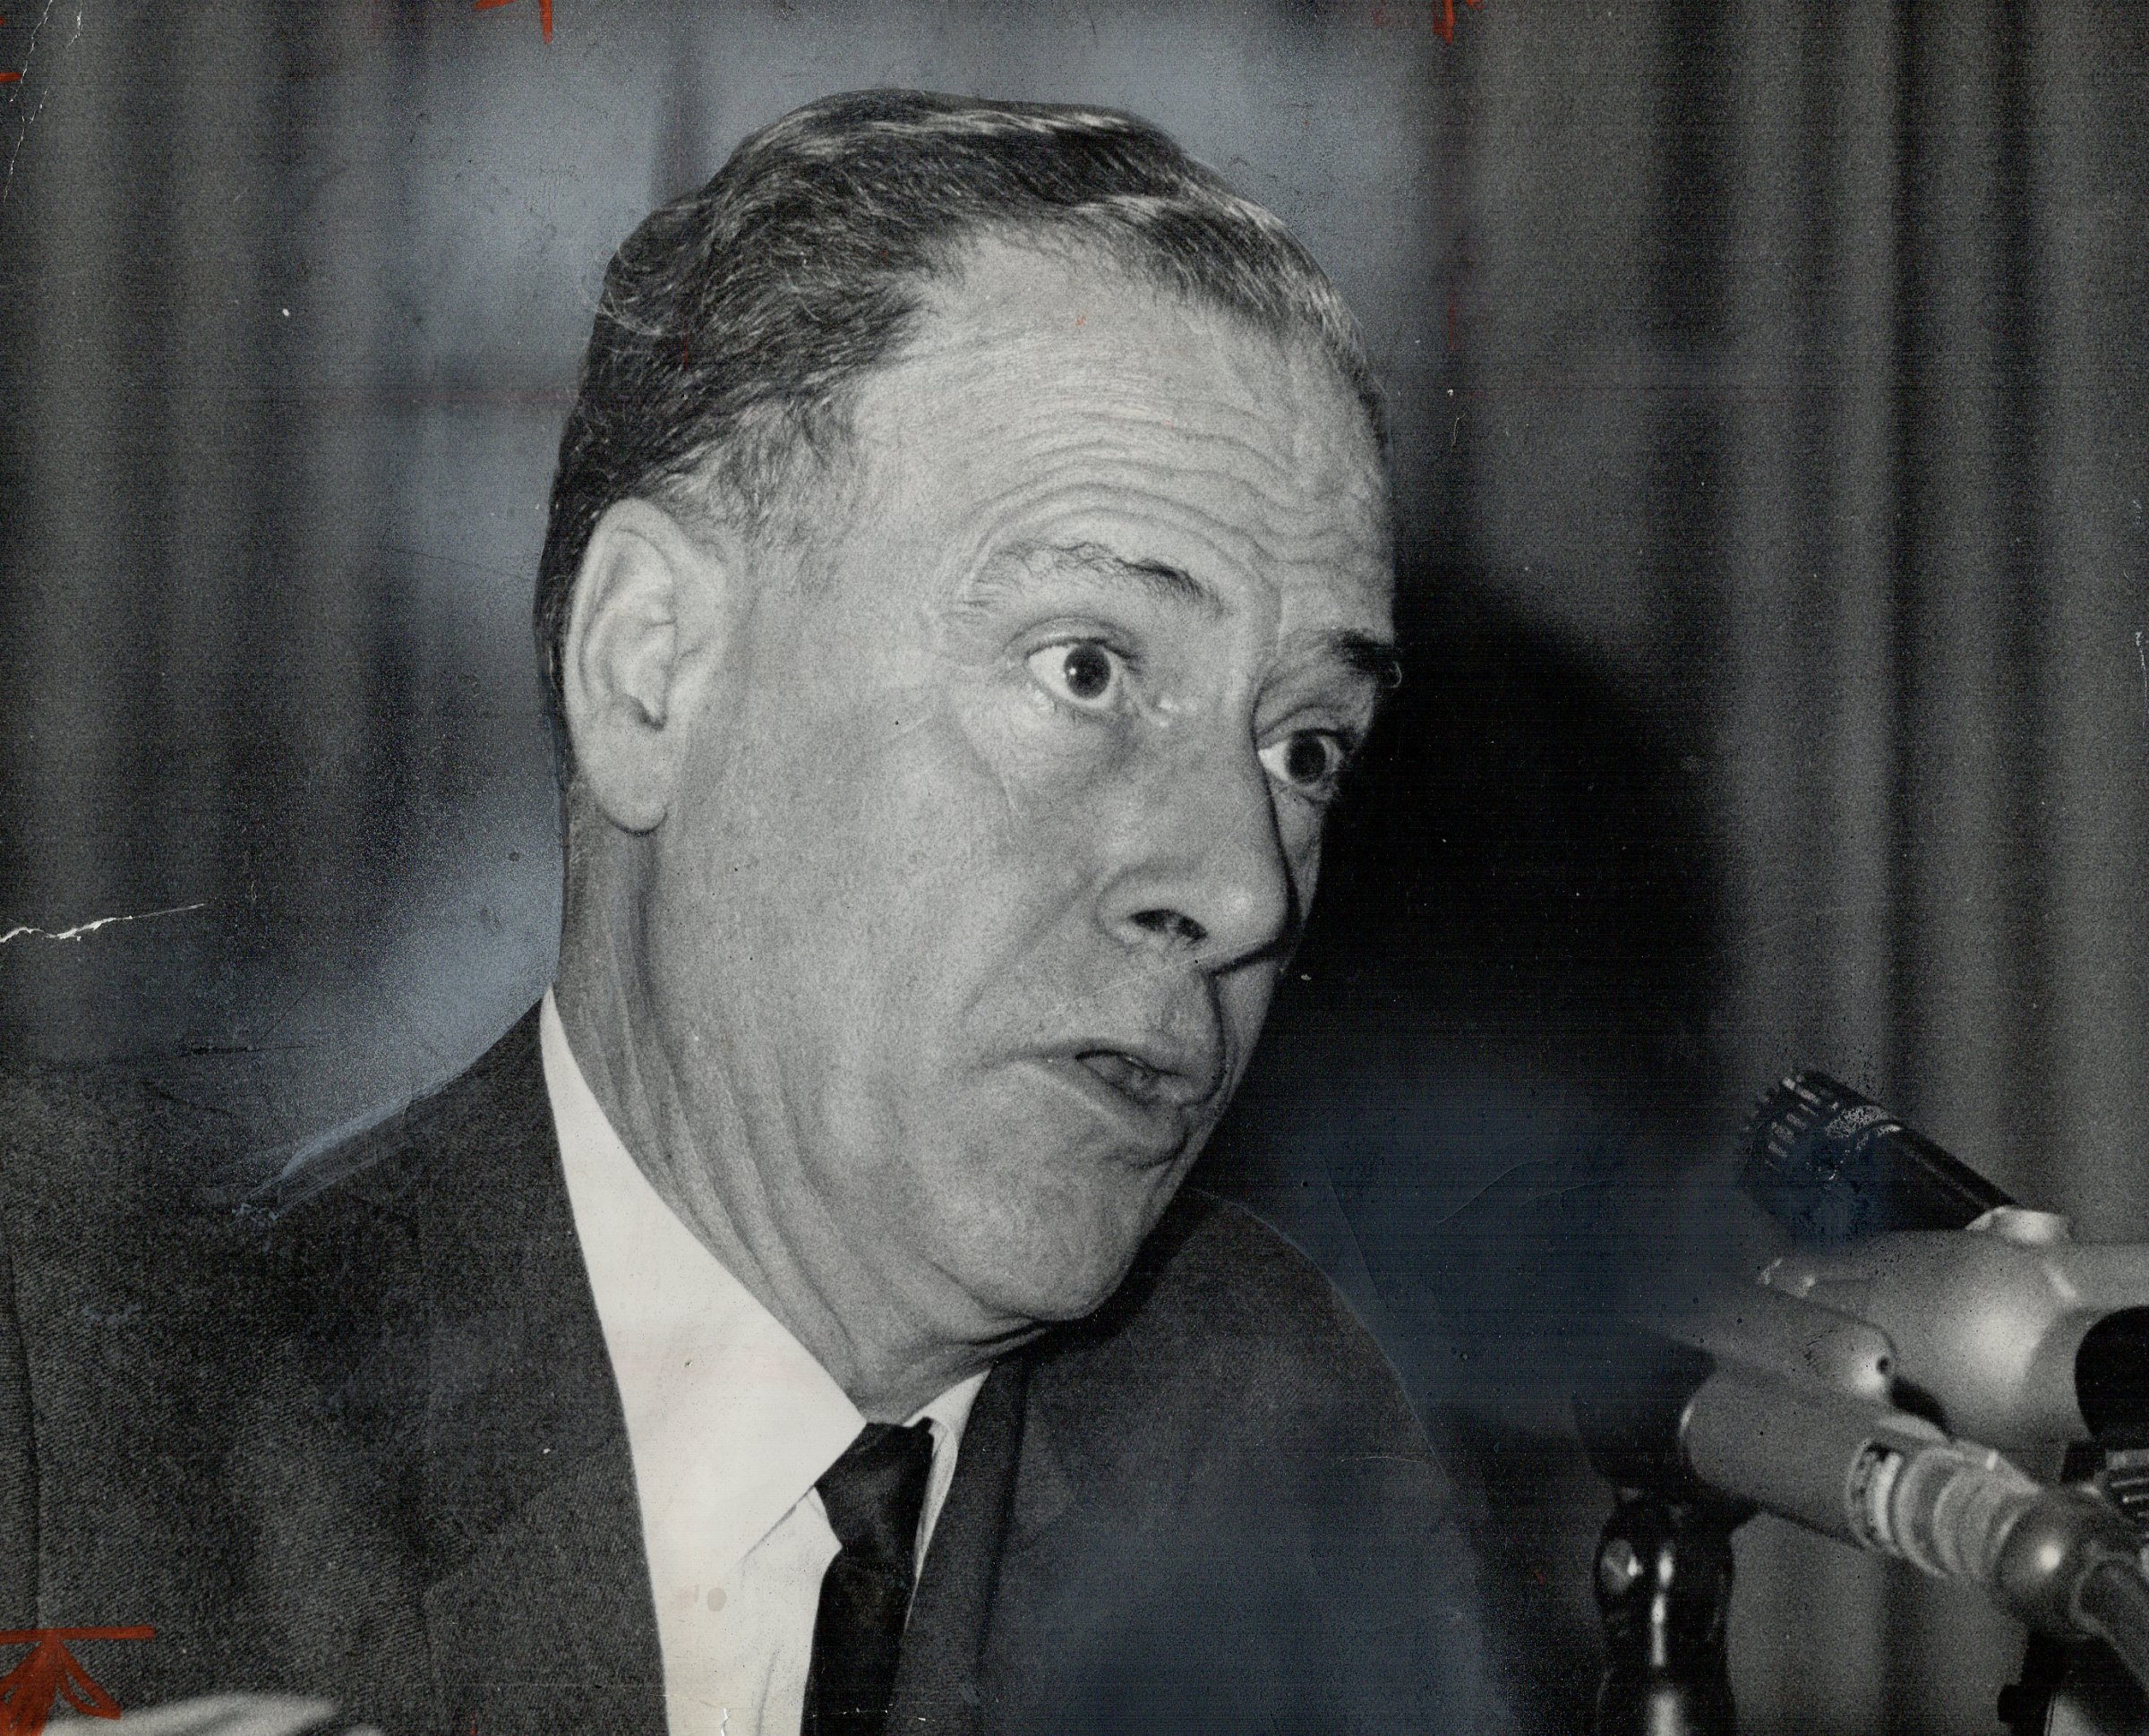 Marshall McLuhan, author and expert on communications, in Toronto on Sept. 28, 1966.